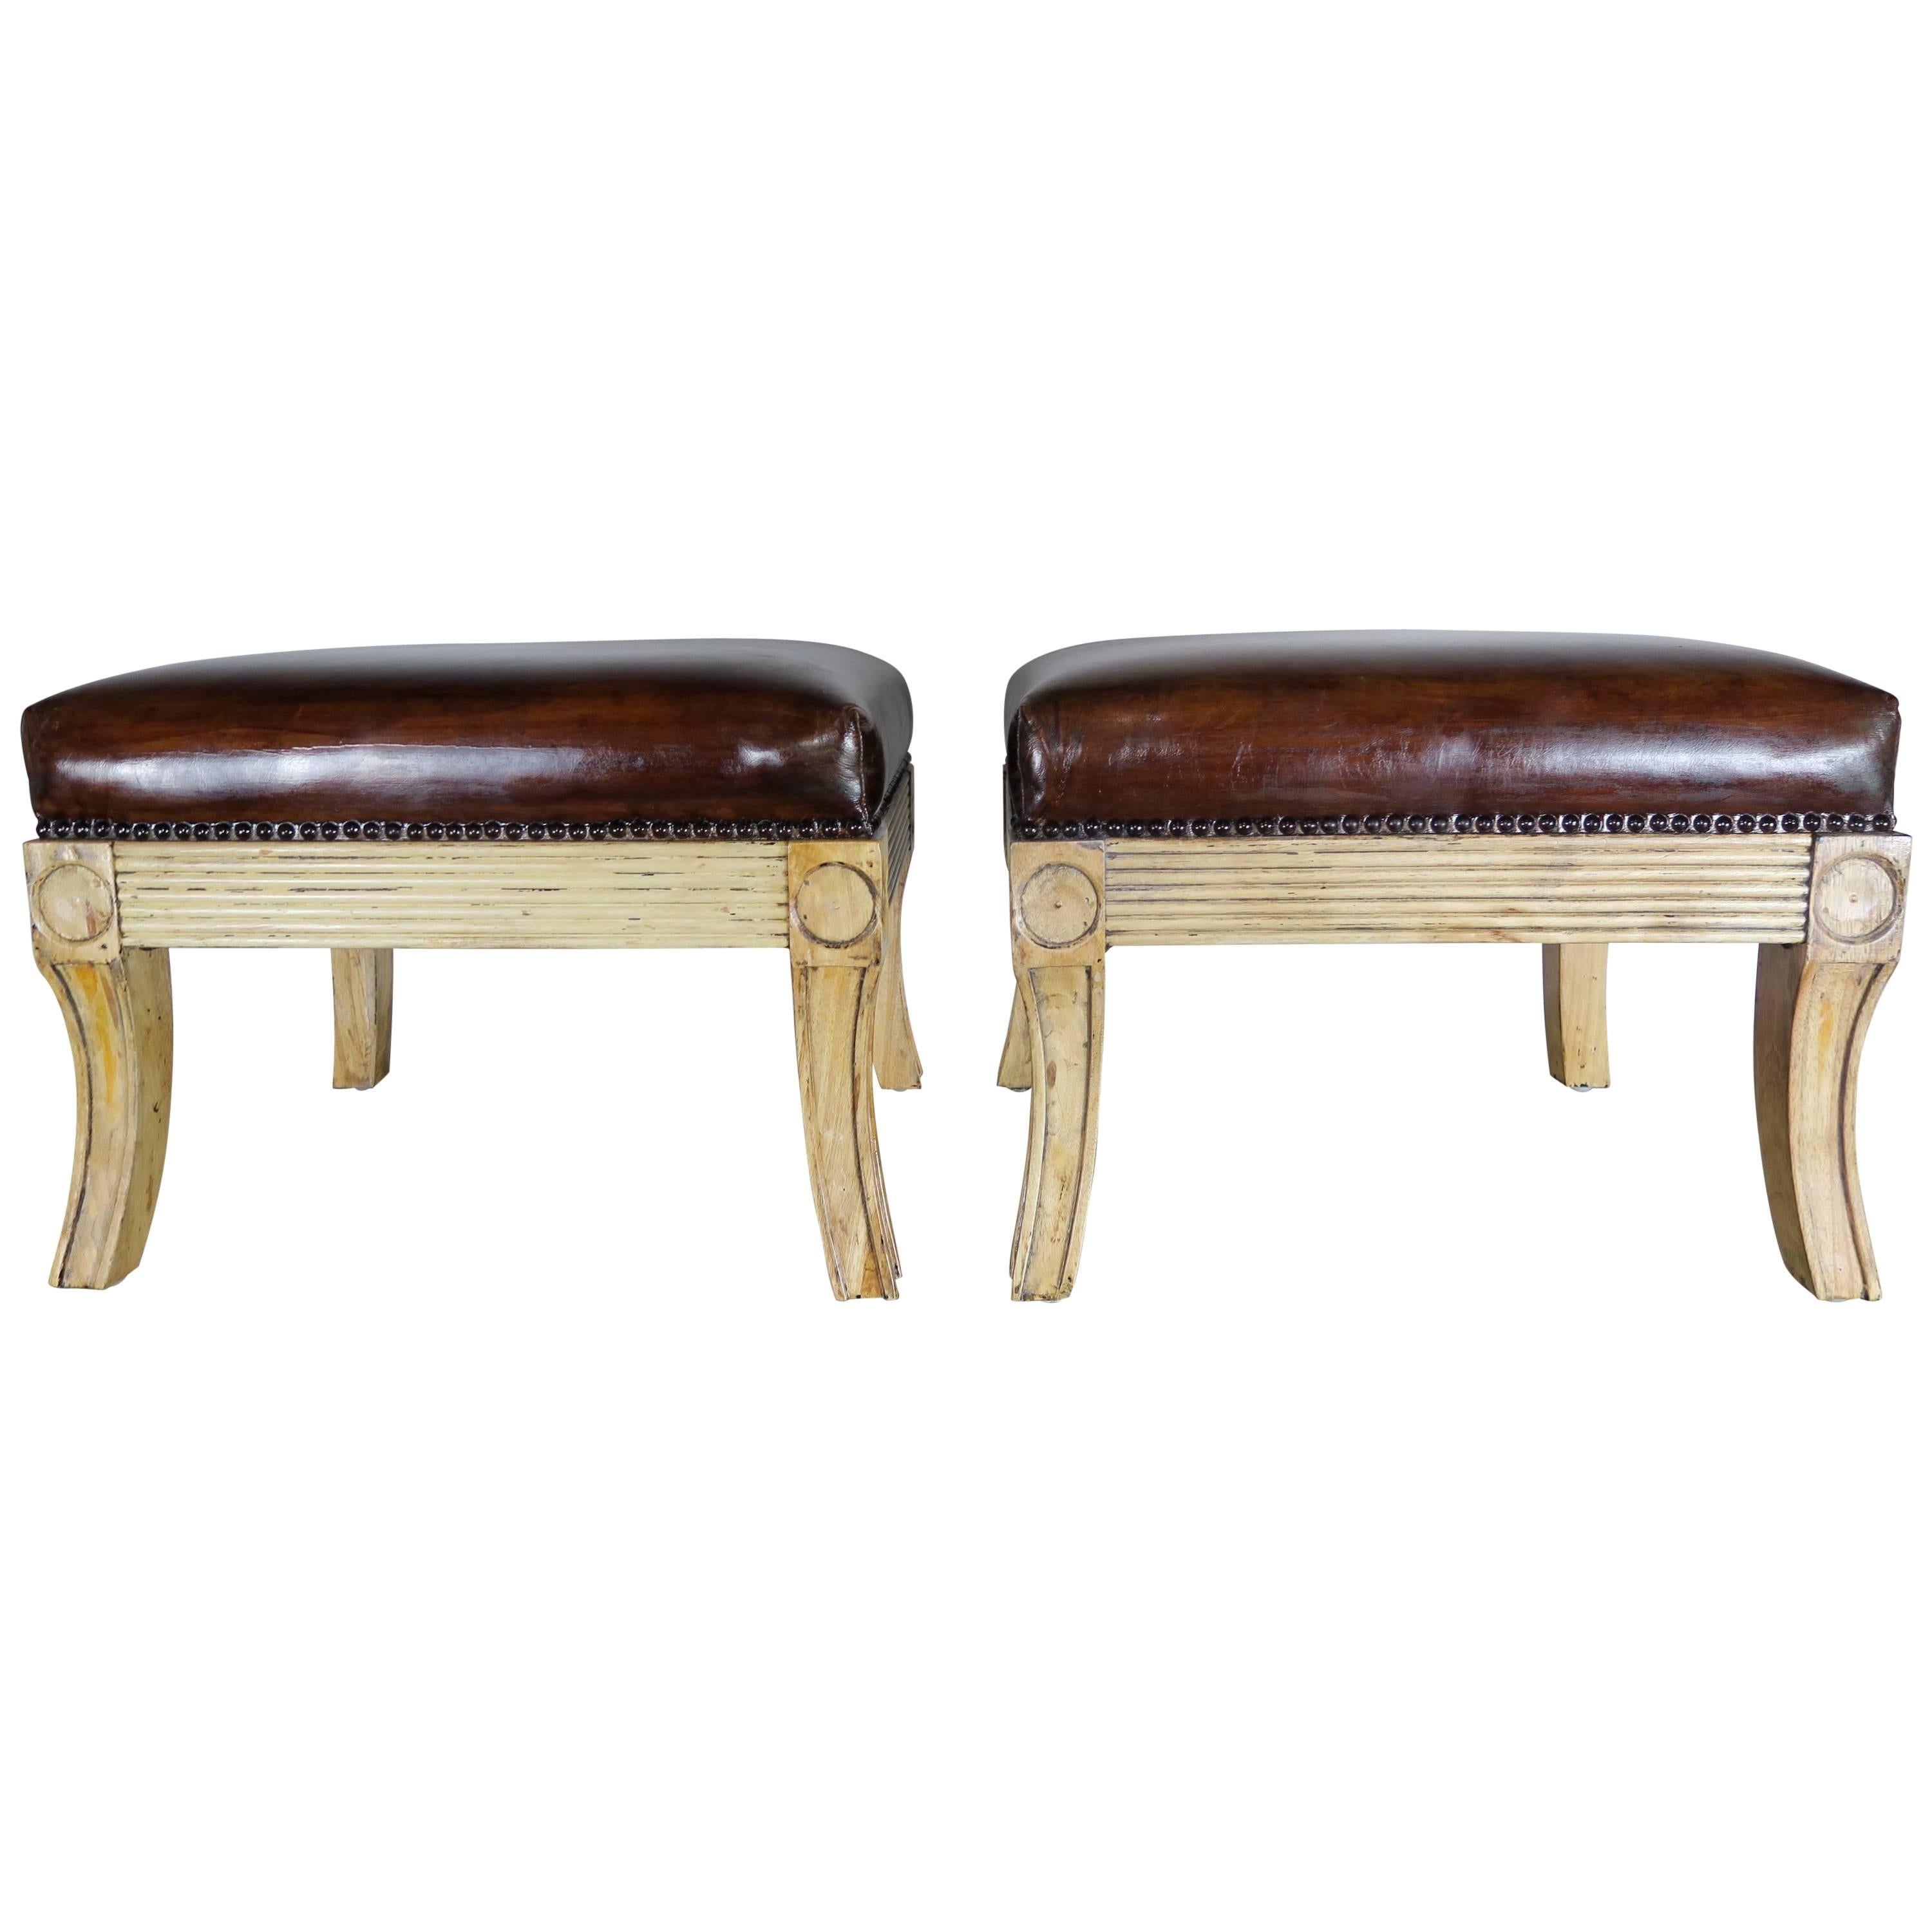 Pair of Italian Leather Upholstered Benches